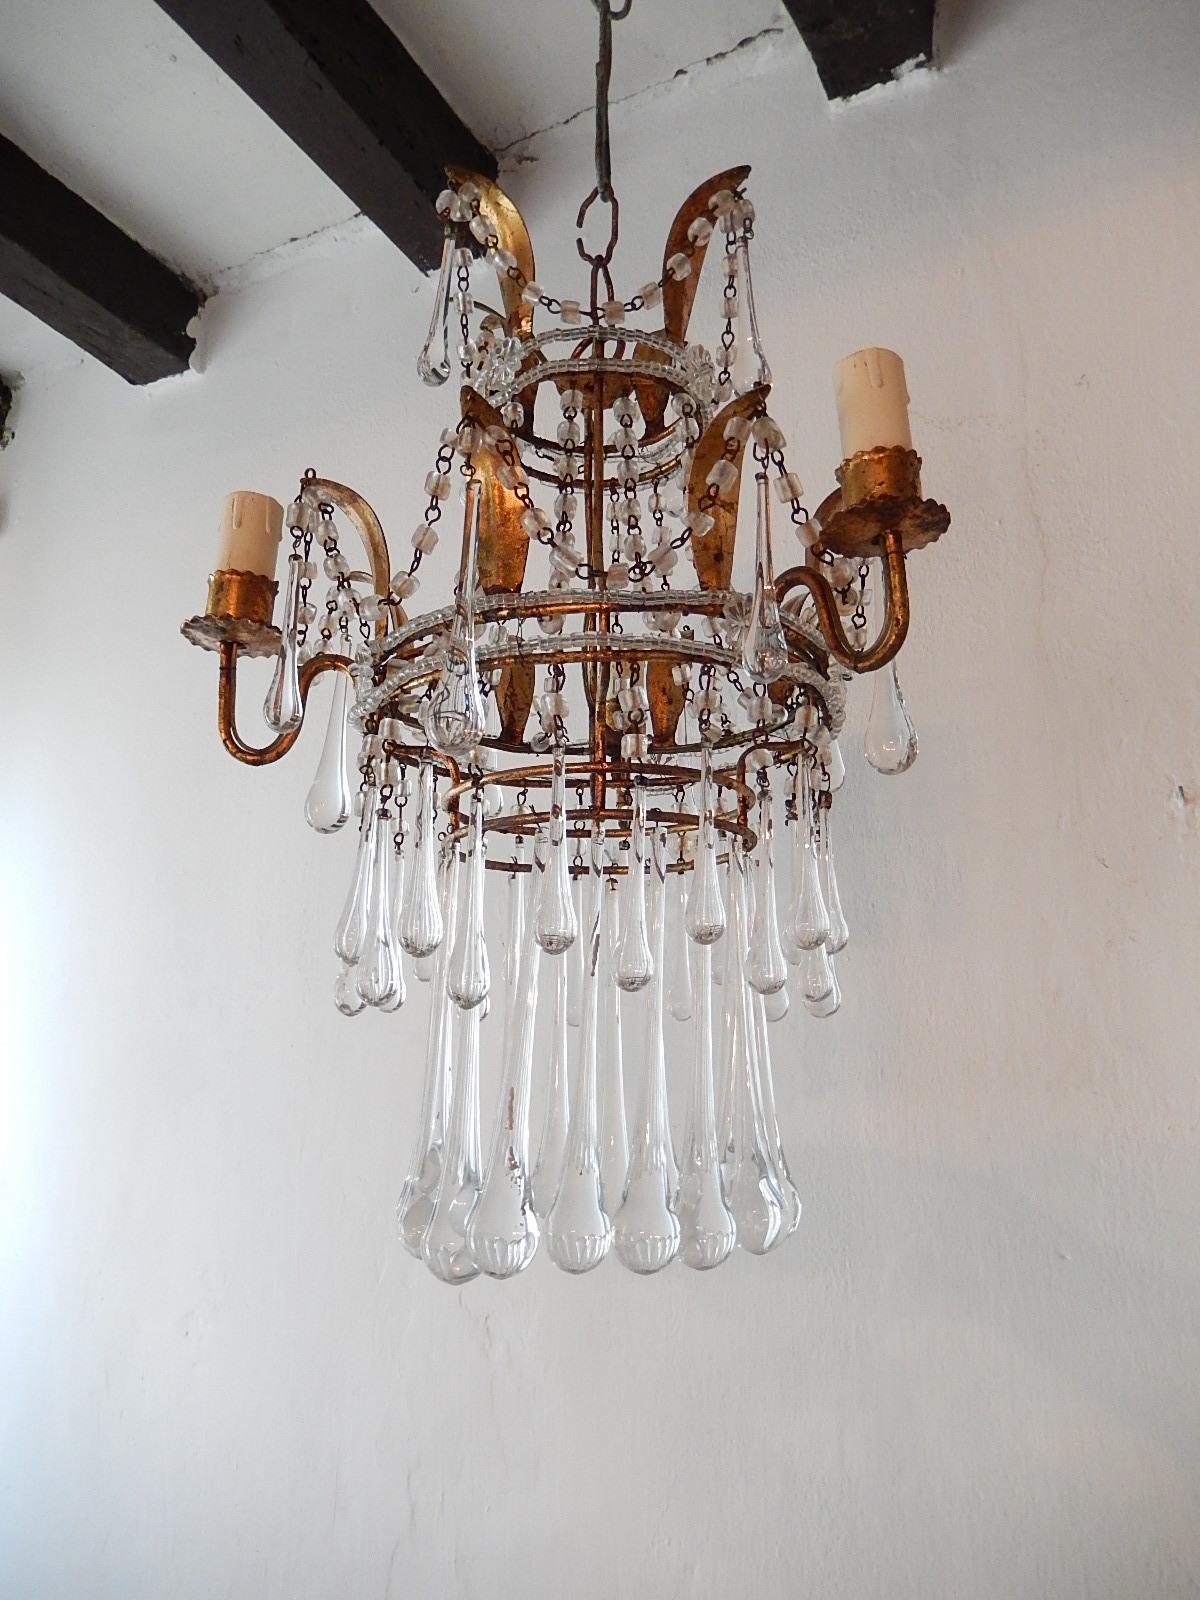 Housing 3 lights. Gilt metal body with tiny beading and florets. Gilt metal with swags of macaroni beads and many clear Murano drops. Original chain and canopy. Will be newly rewired with certified US UL sockets for the Usa and appropriate sockets